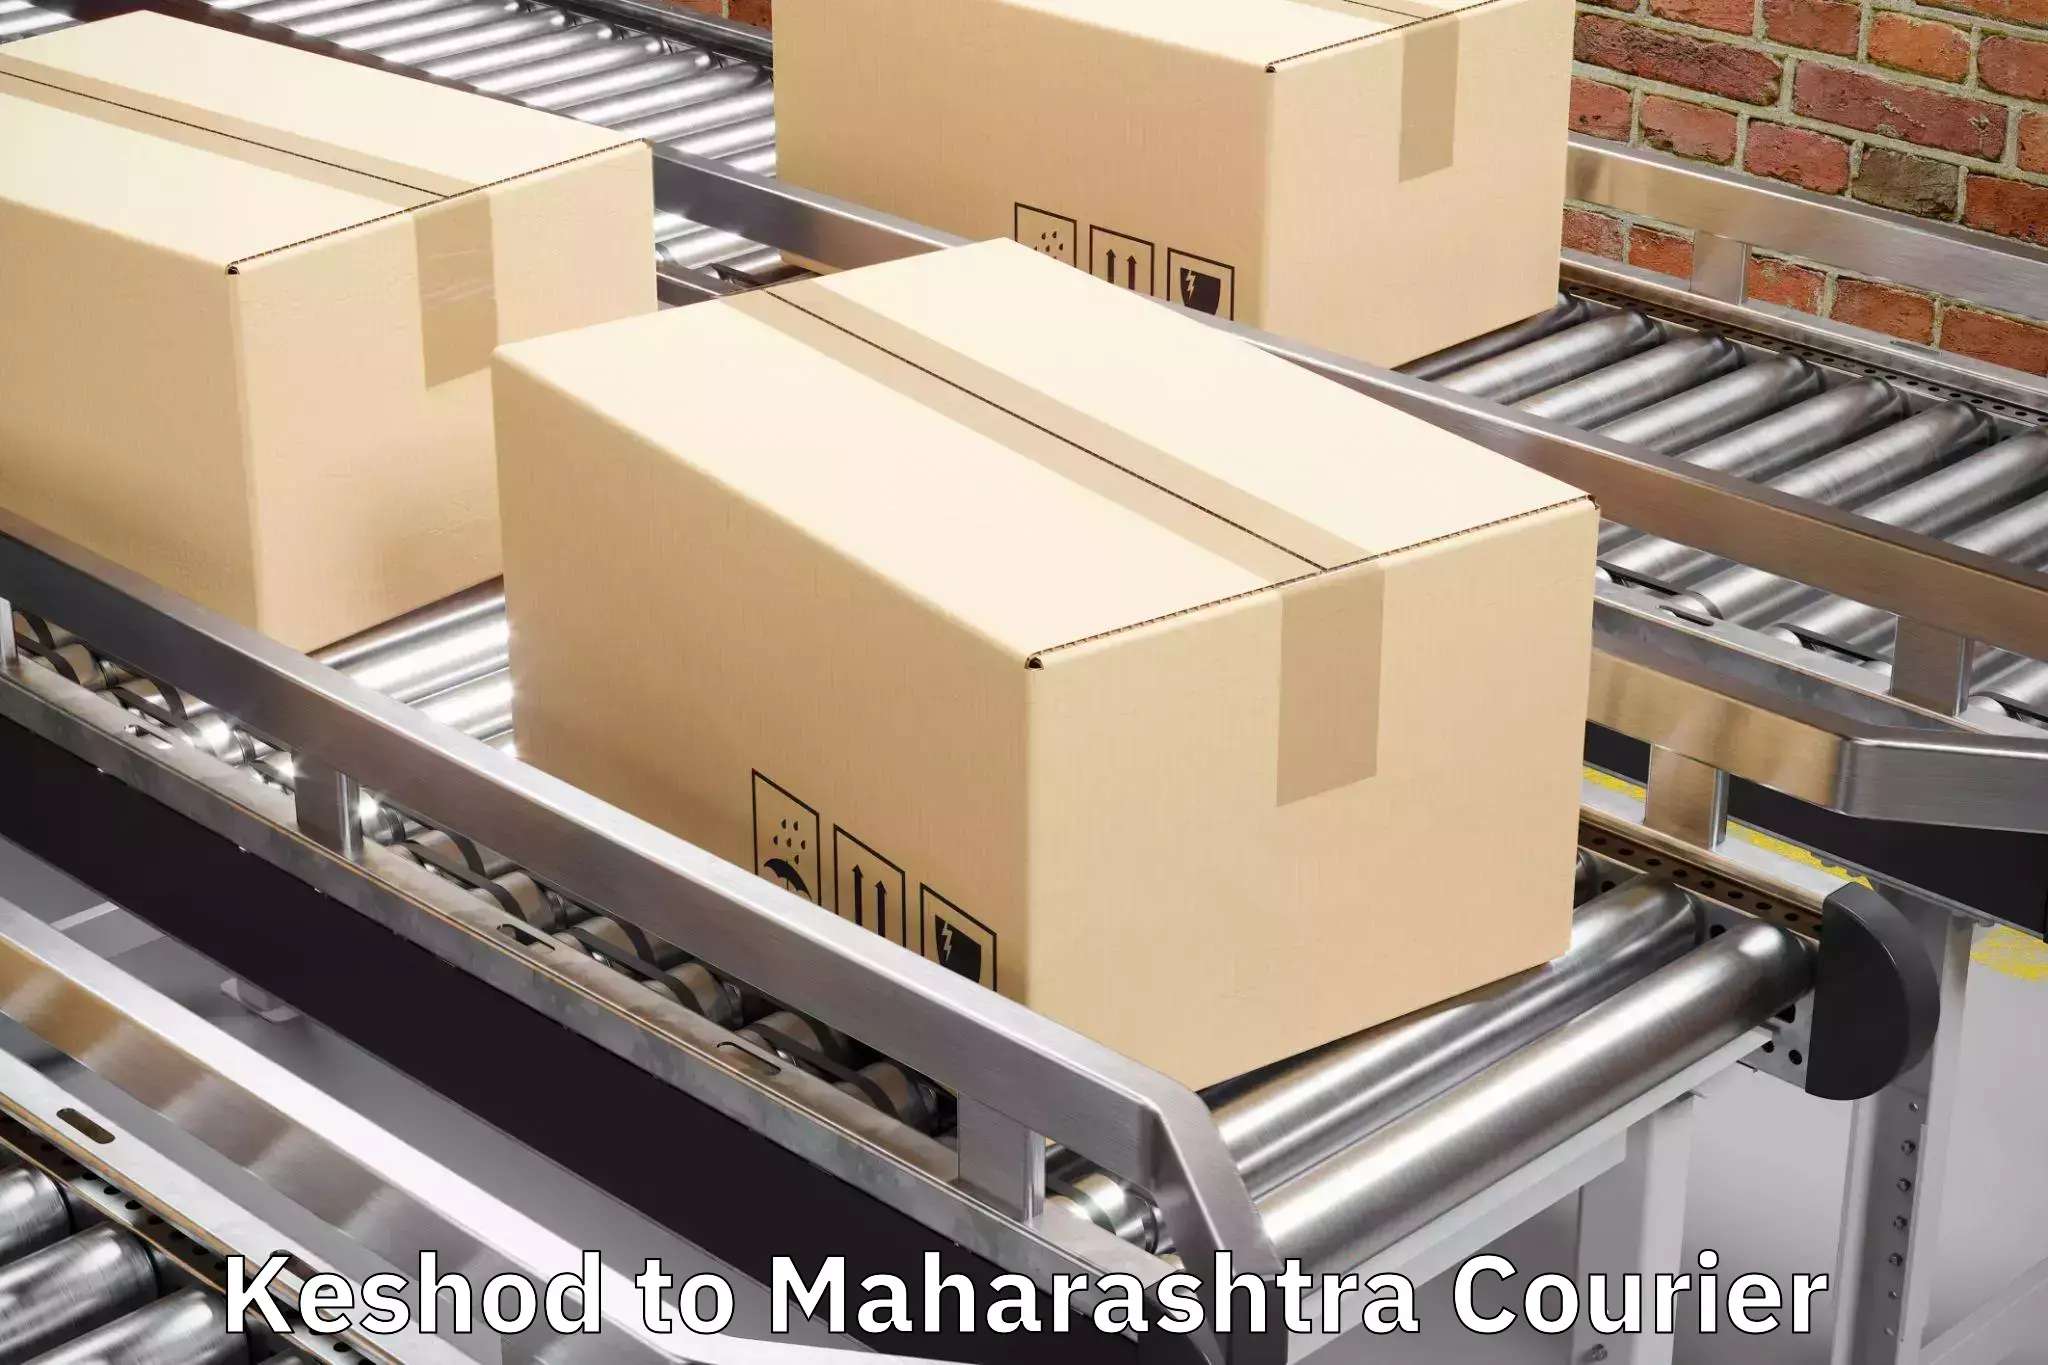 Baggage handling services in Keshod to Pune